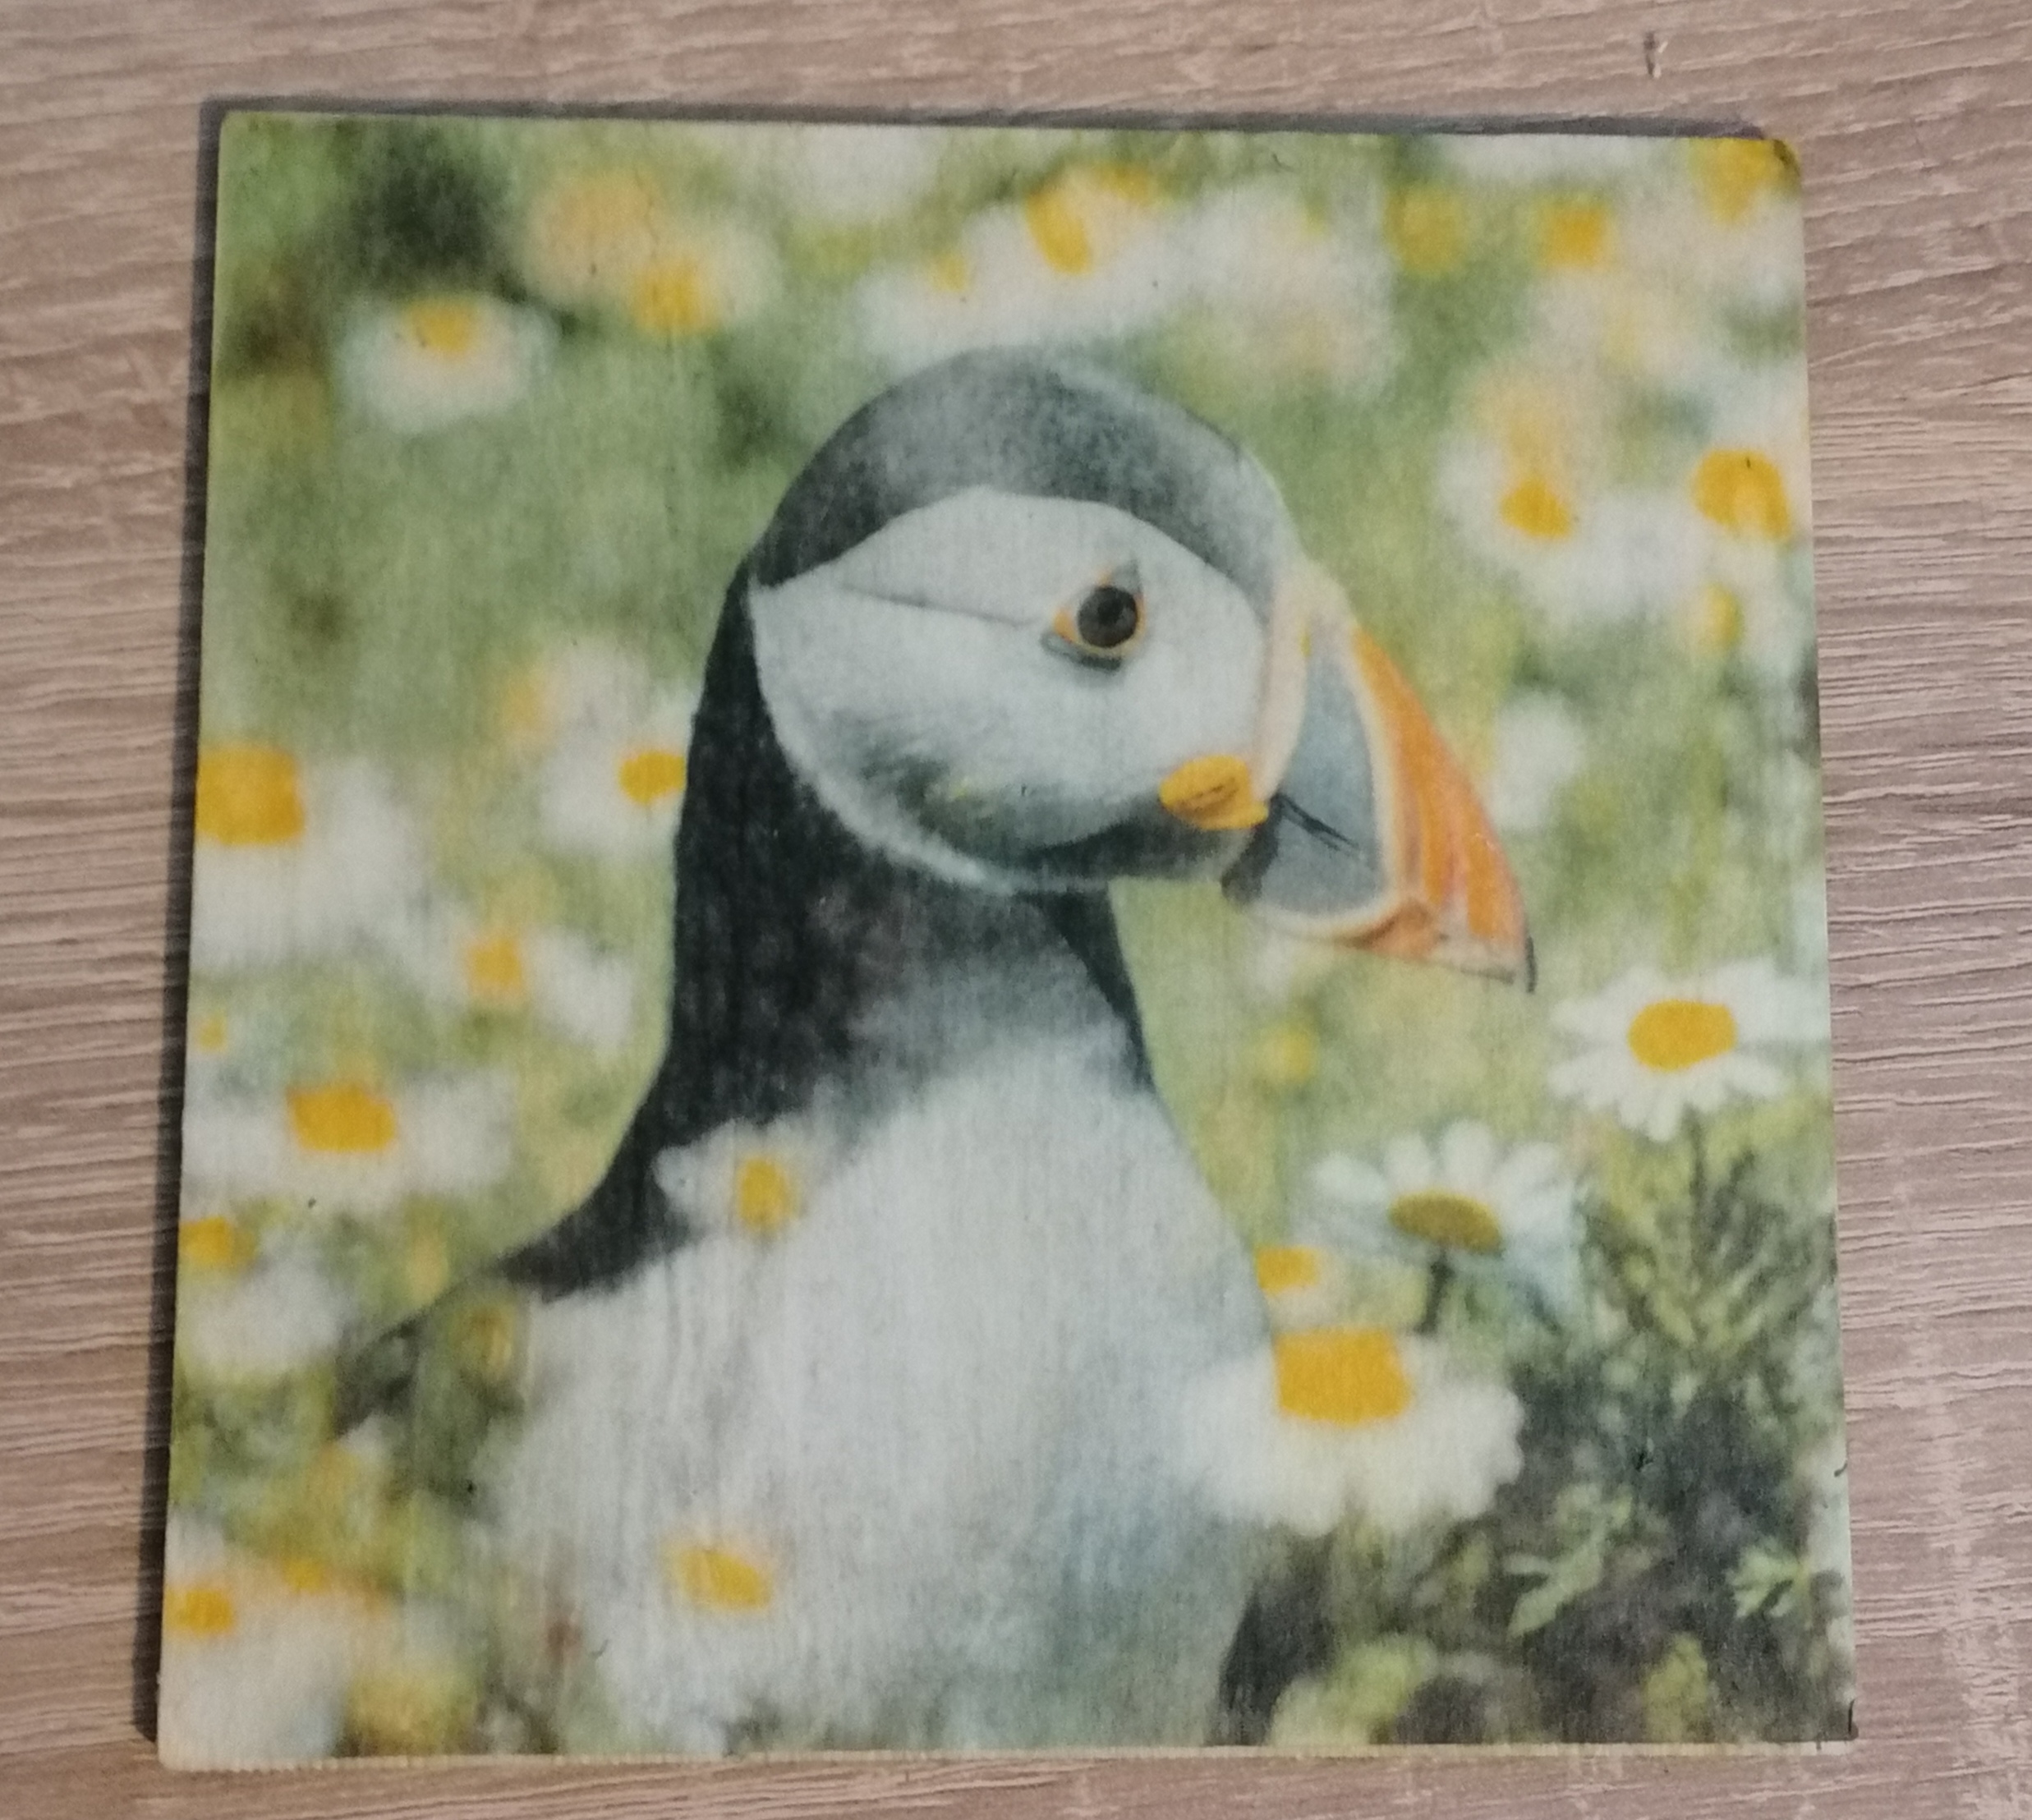 Wooden puffin photo